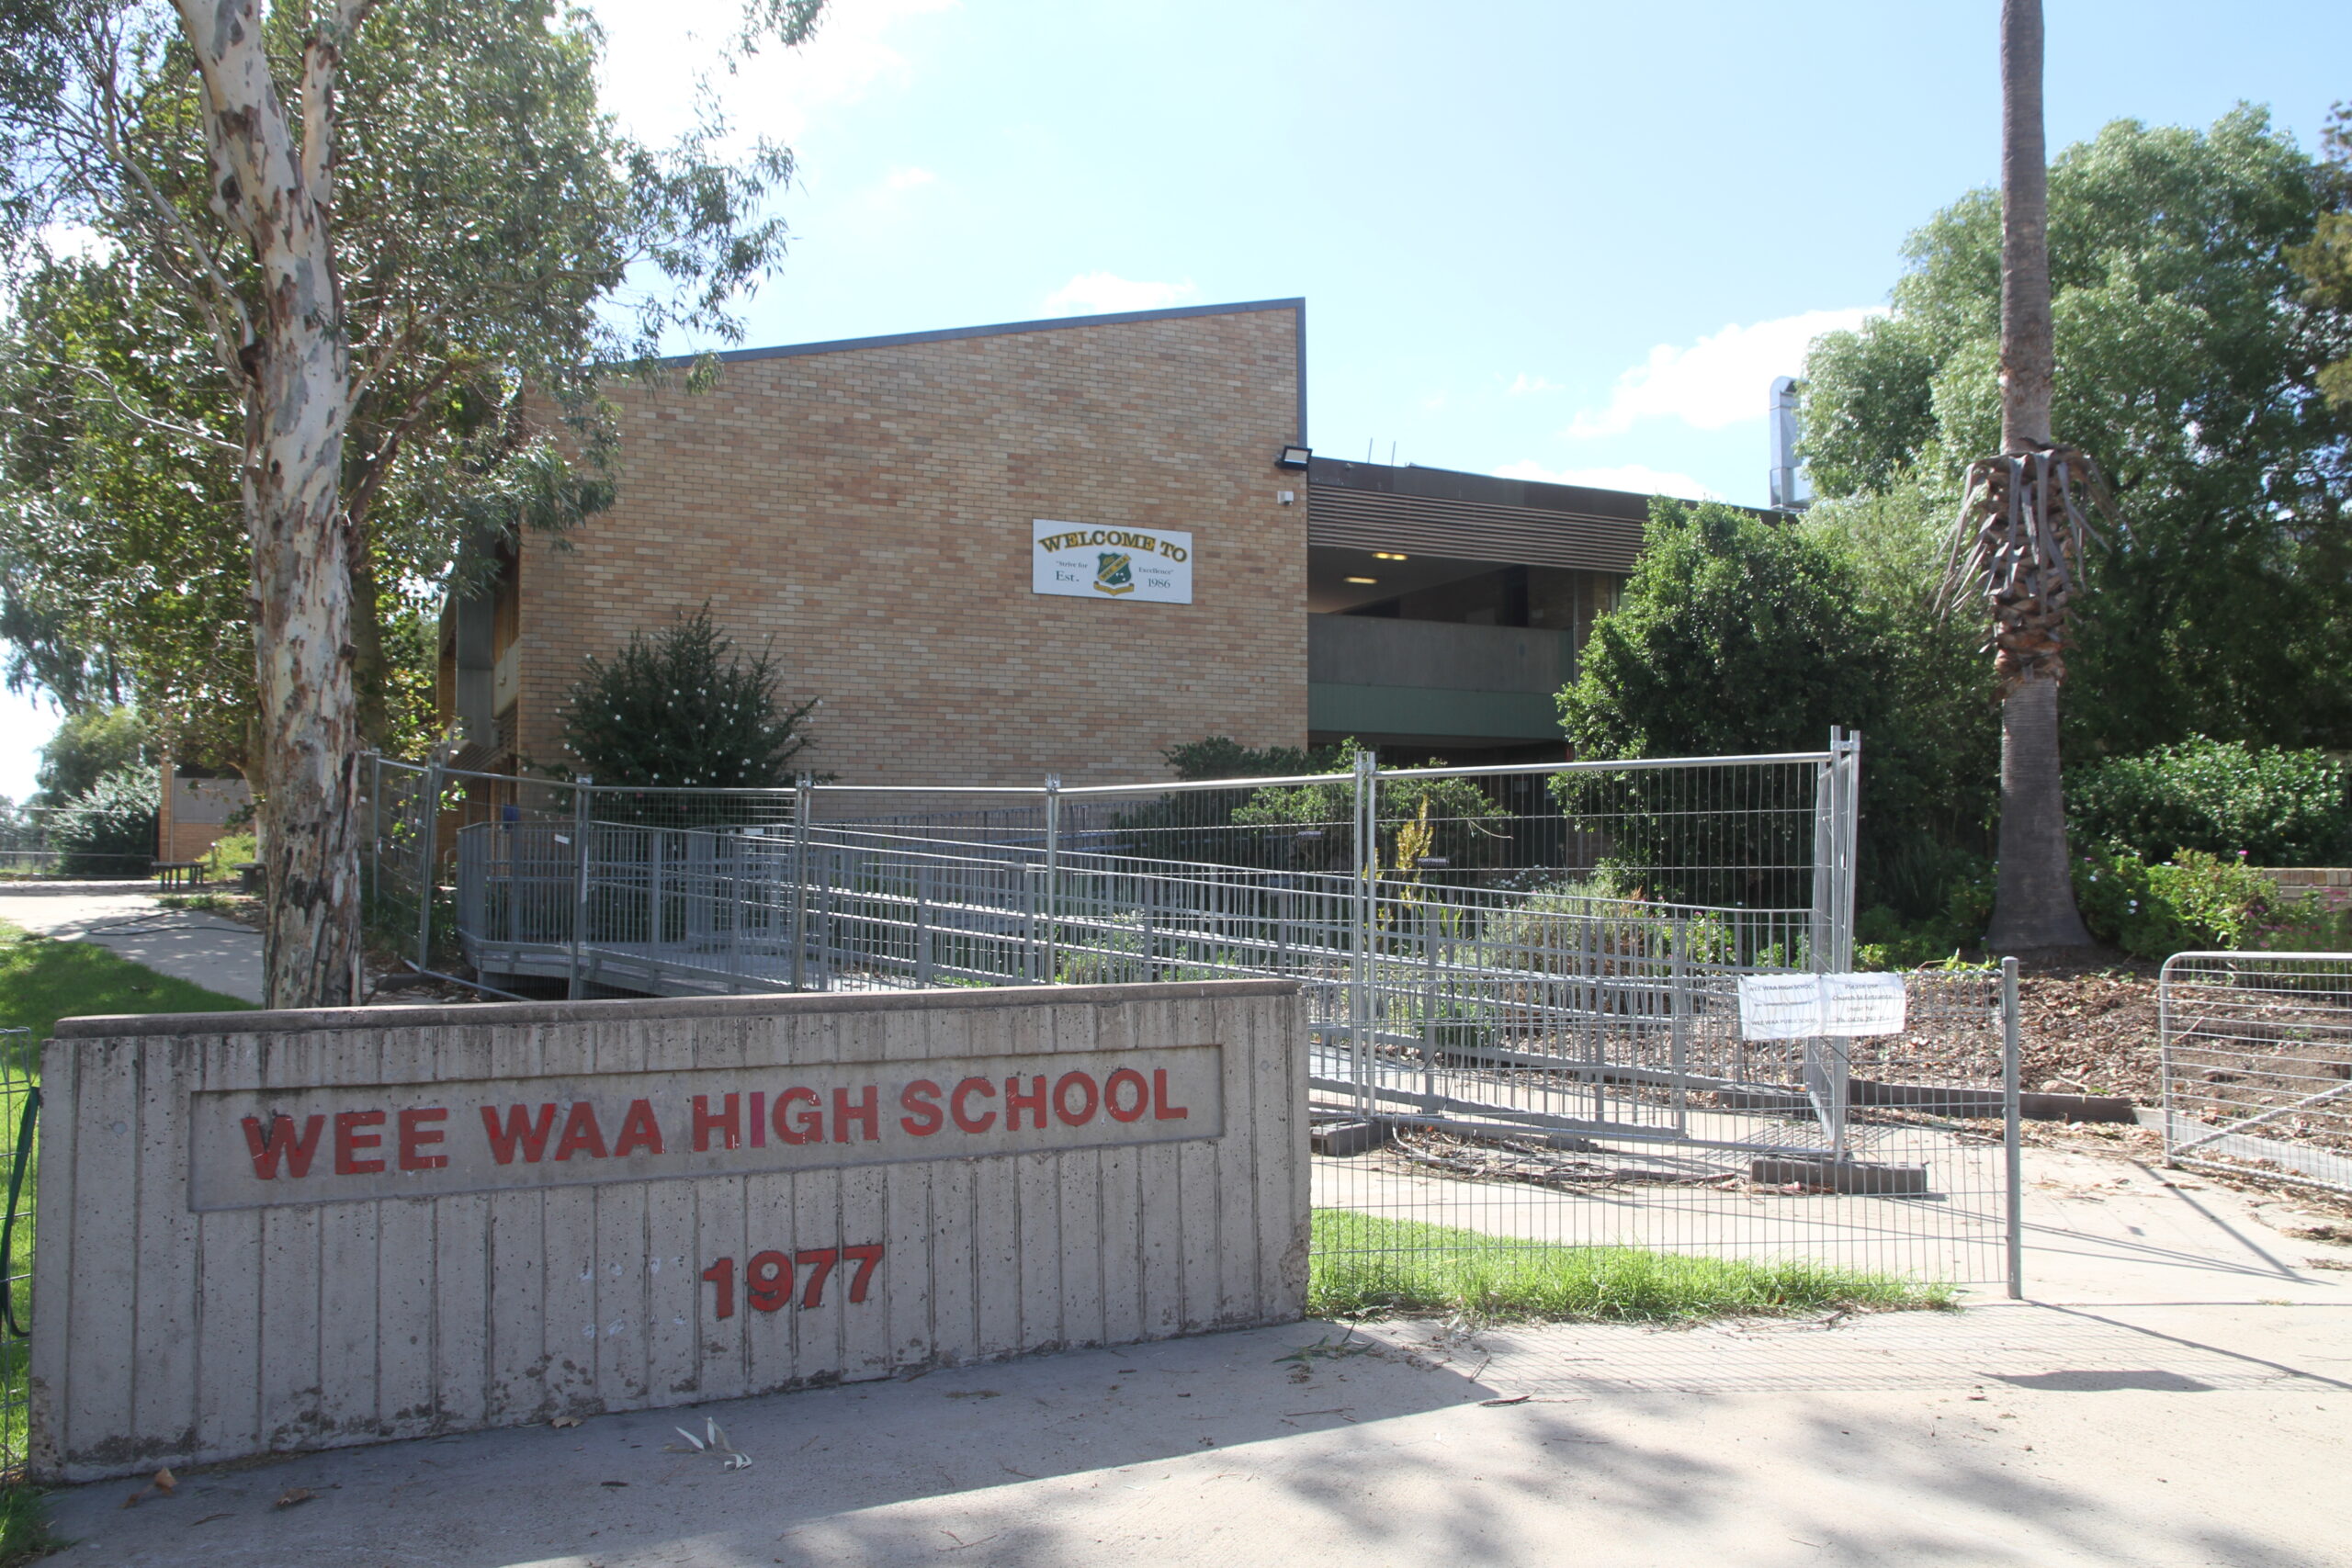 UPDATE: Latest on the future of Wee Waa High School